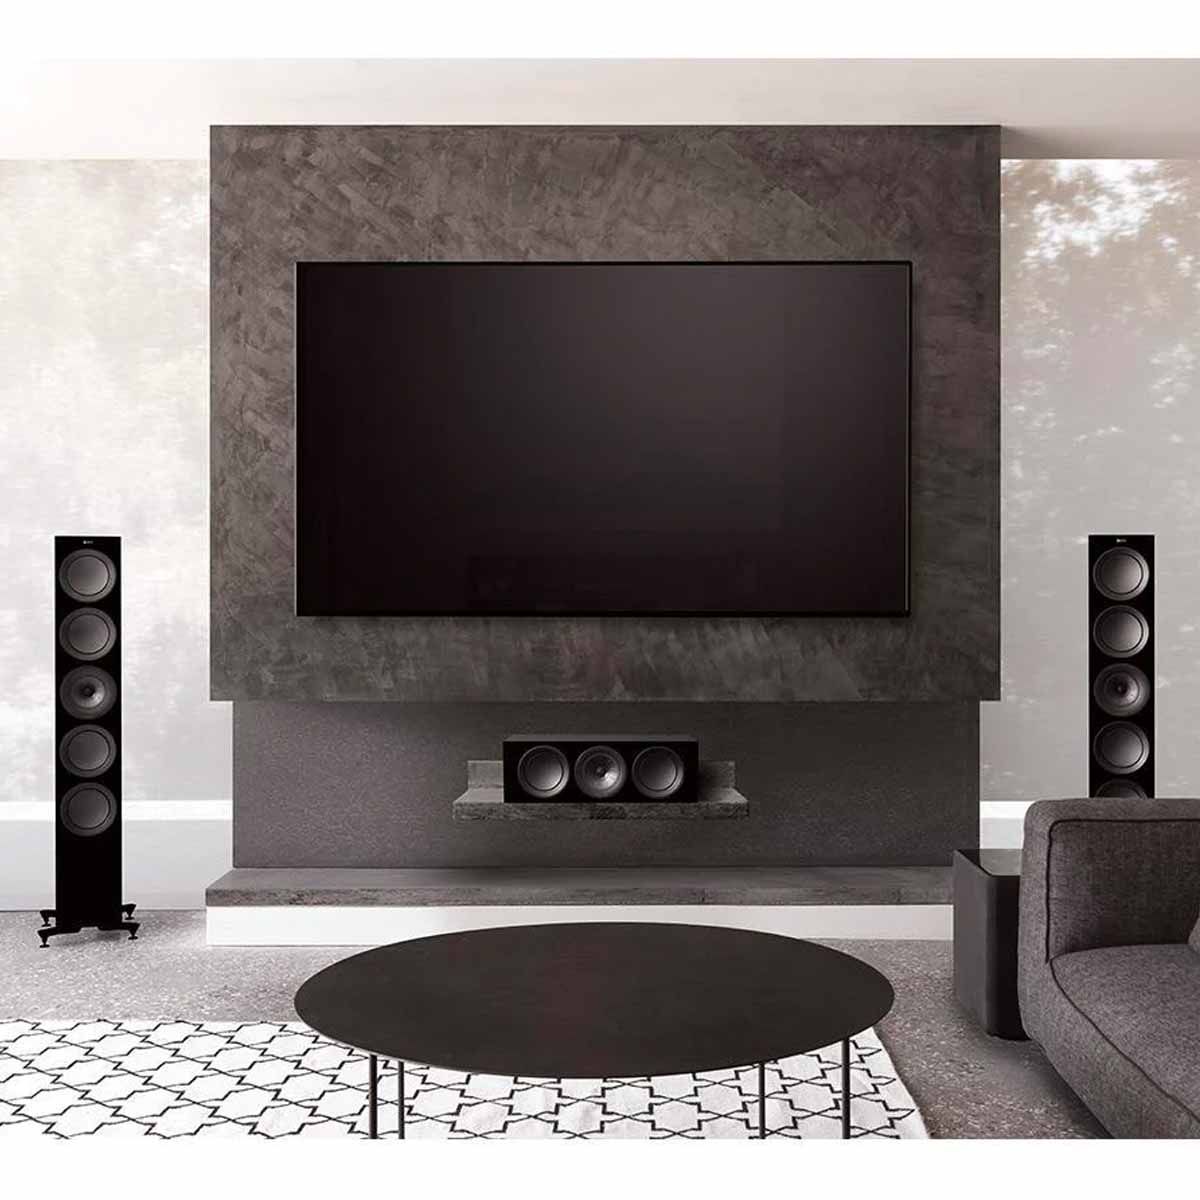 KEF R11 Floorstanding Loudspeaker - Black - in room with TV mounted on stone accent wall